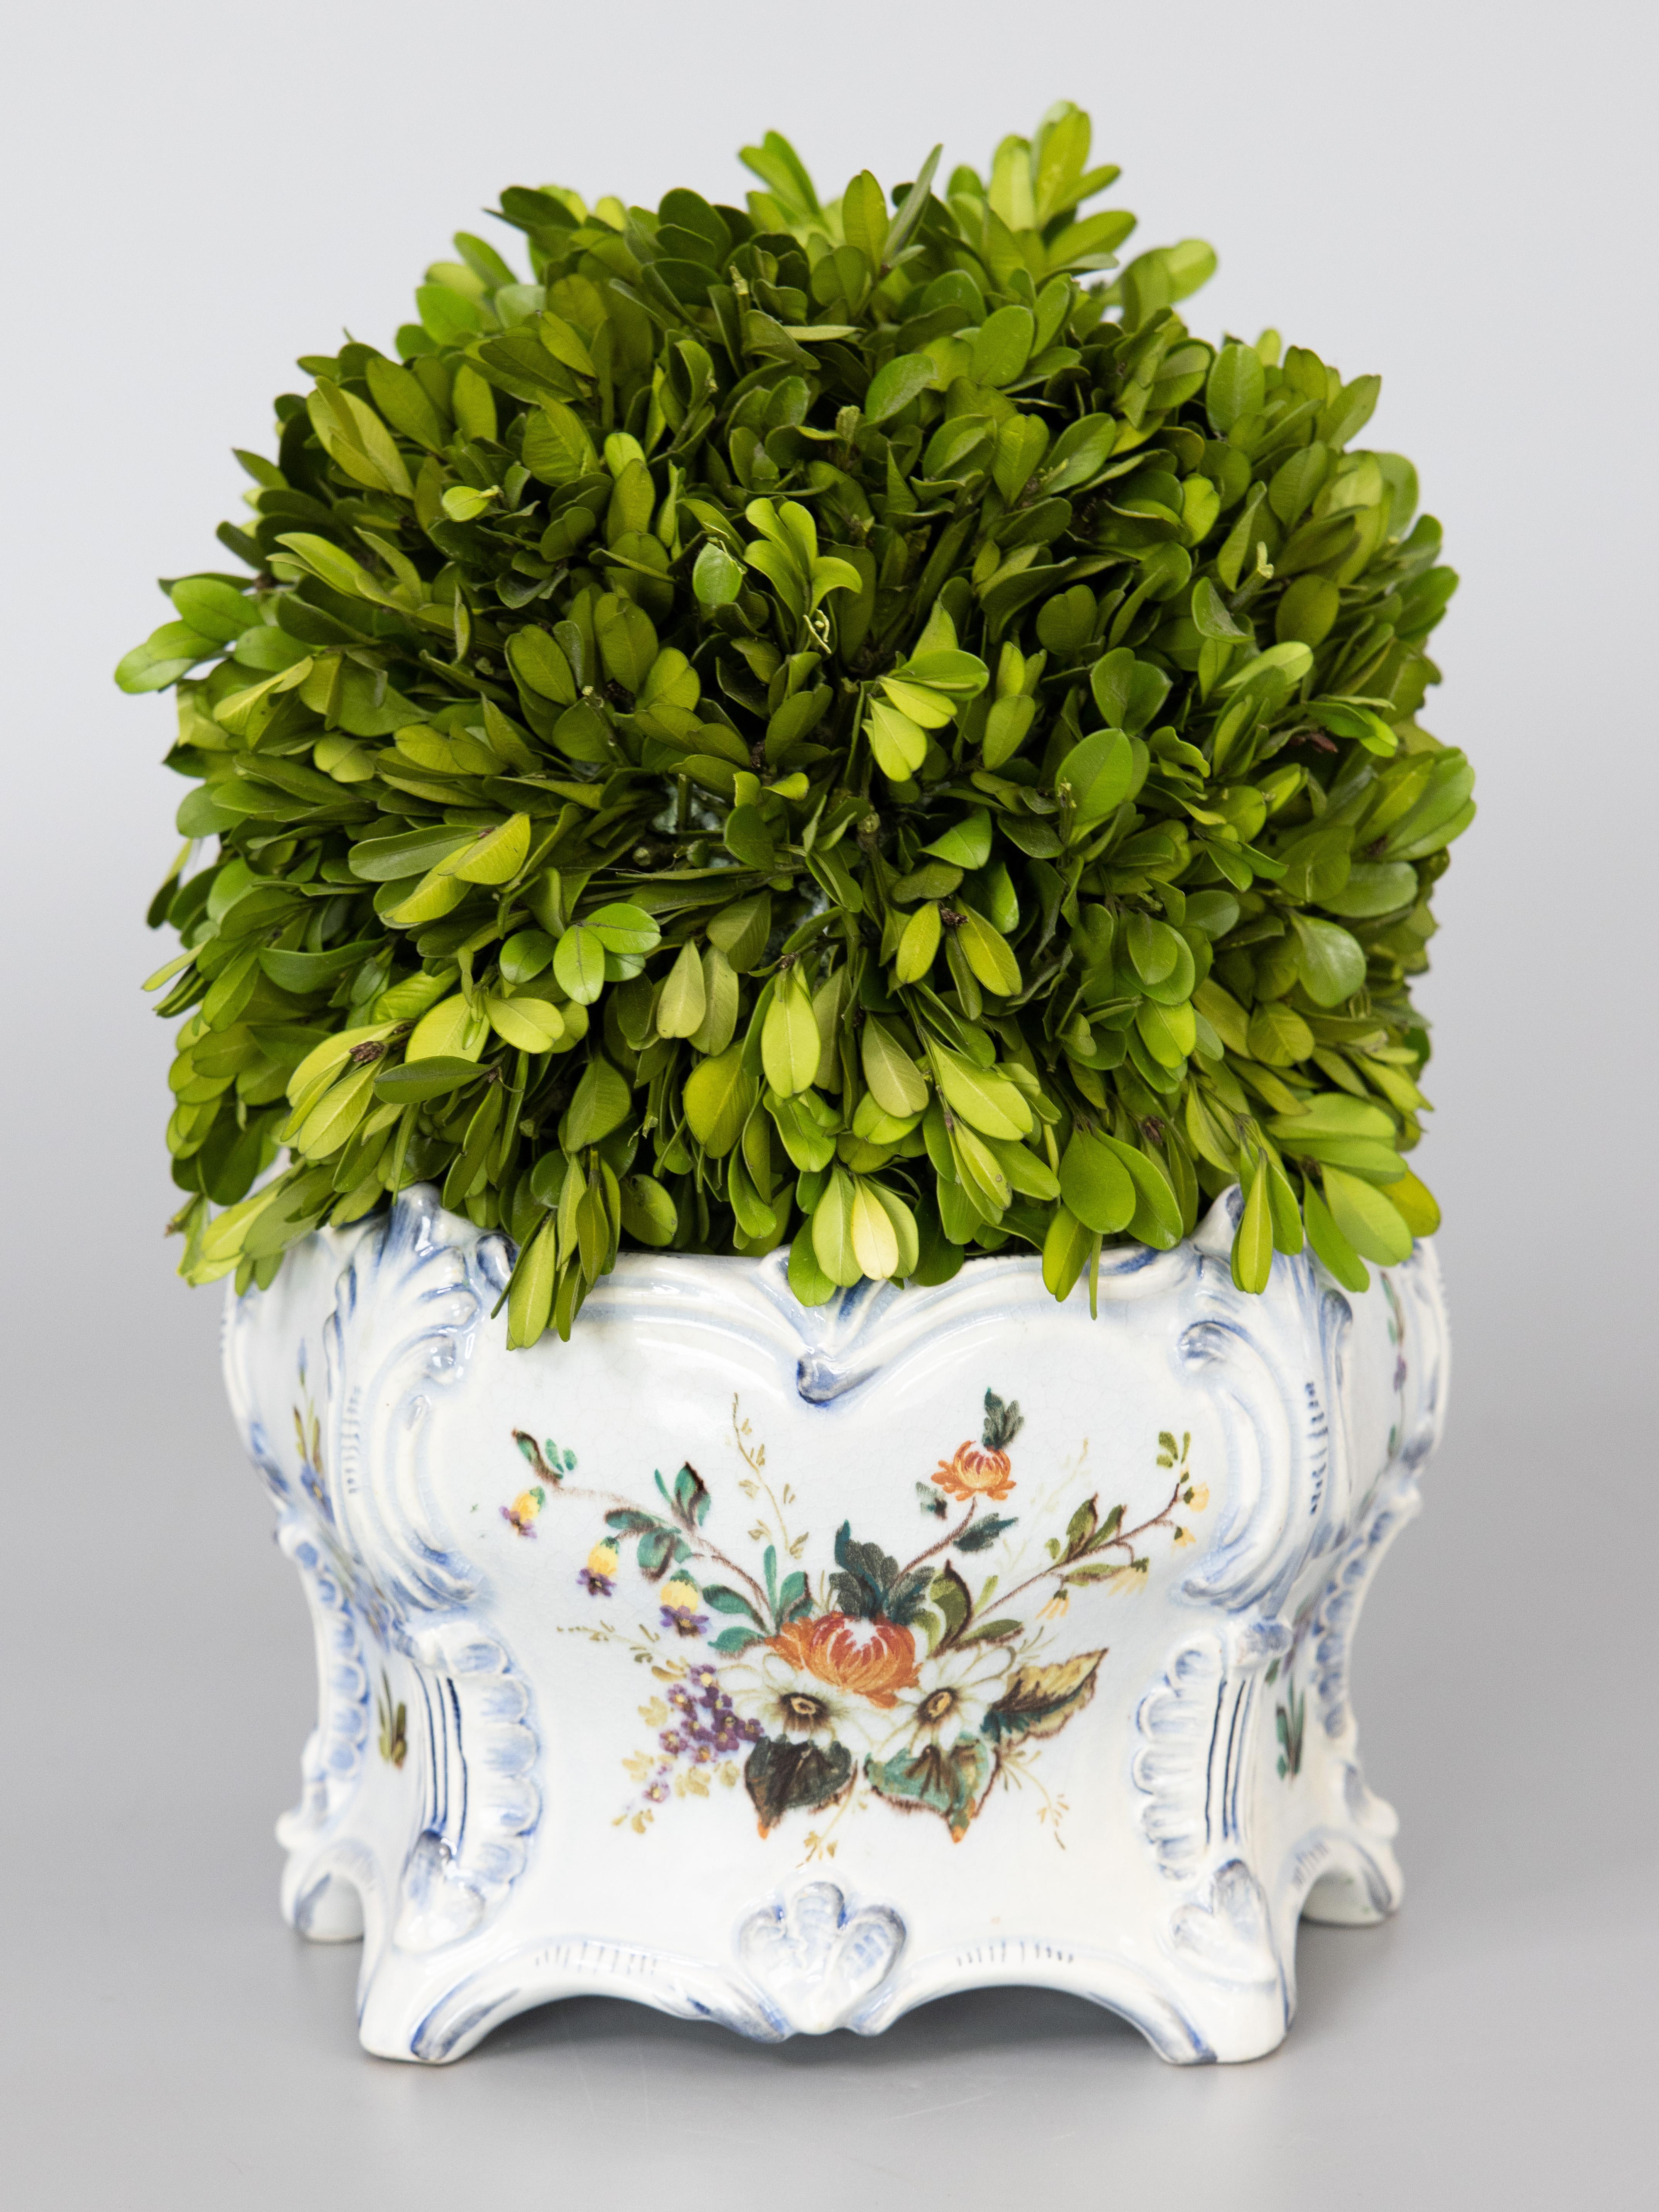 19th Century, French Country Floral Faience Cachepot Jardiniere Planter For Sale 3